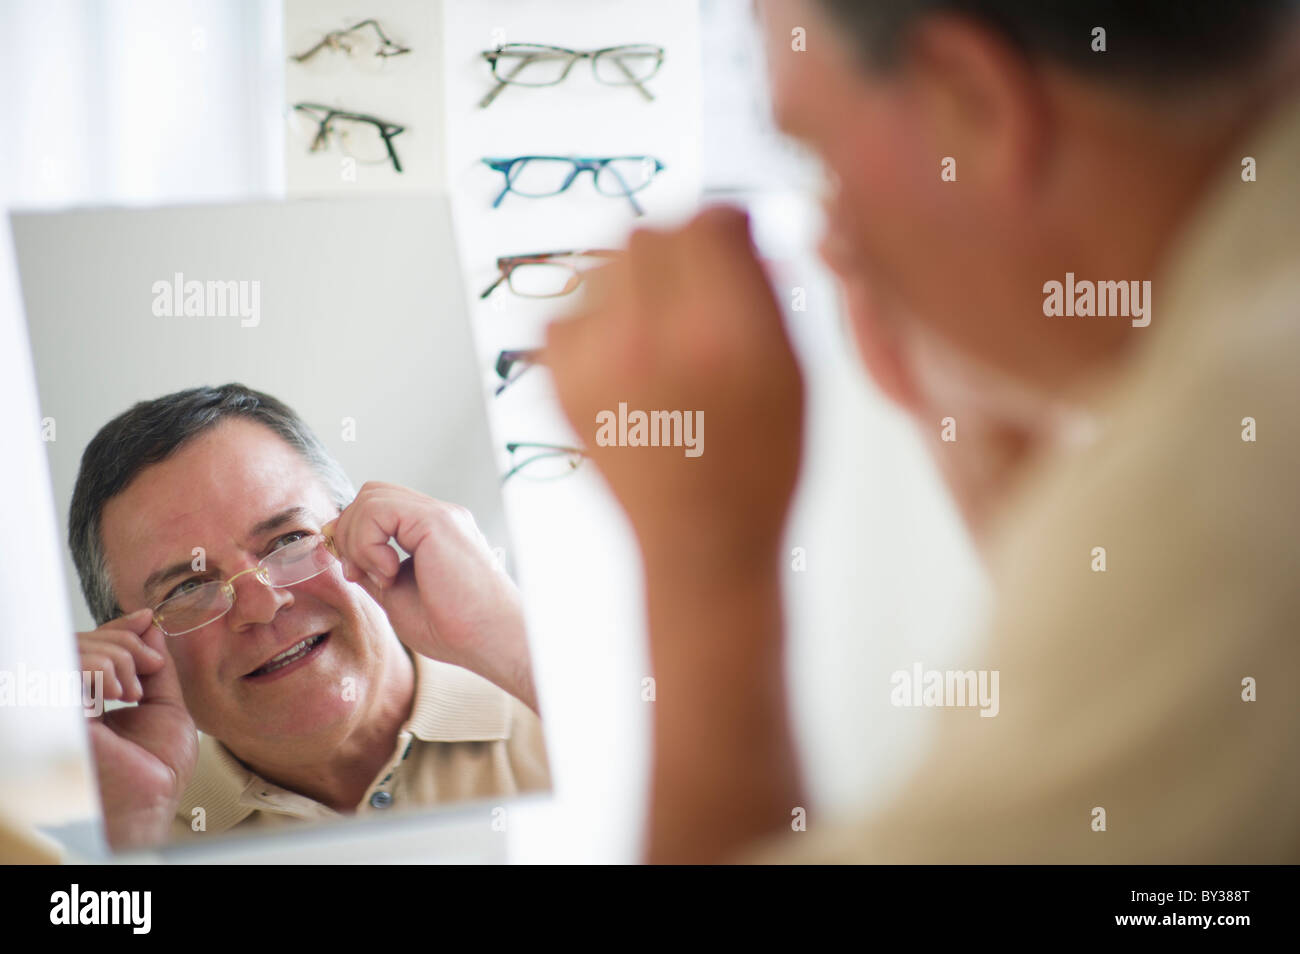 USA, New Jersey, Jersey City, Man trying on glasses in shop mirror Stock Photo